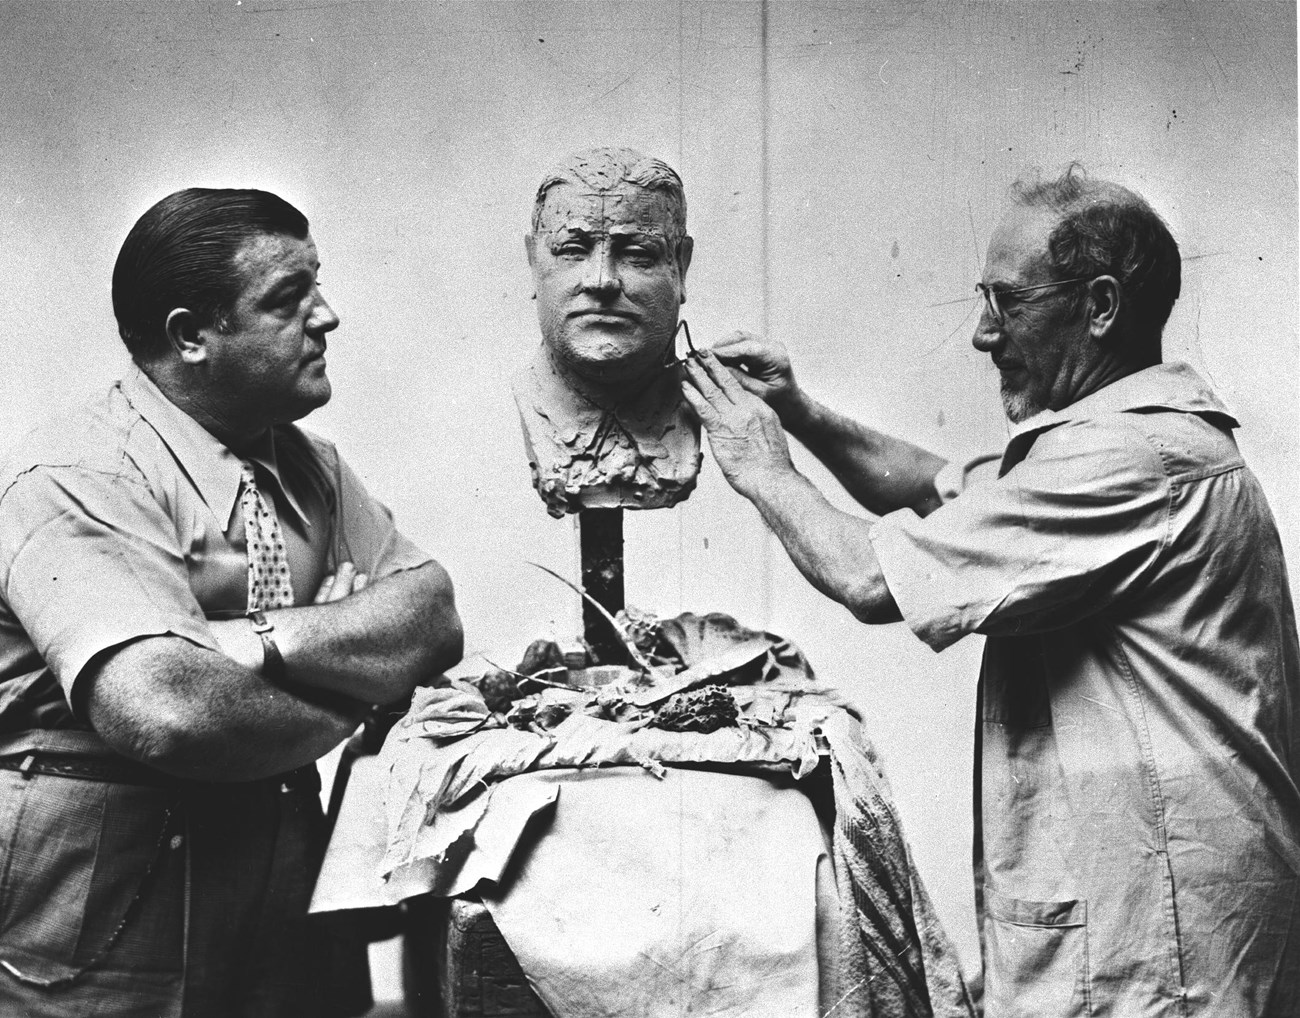 Black & white photo of sculptor Gaetano Federici, a balding man with a short white beard & glasses, carving a clay bust of Lou Costello as the comedian observes